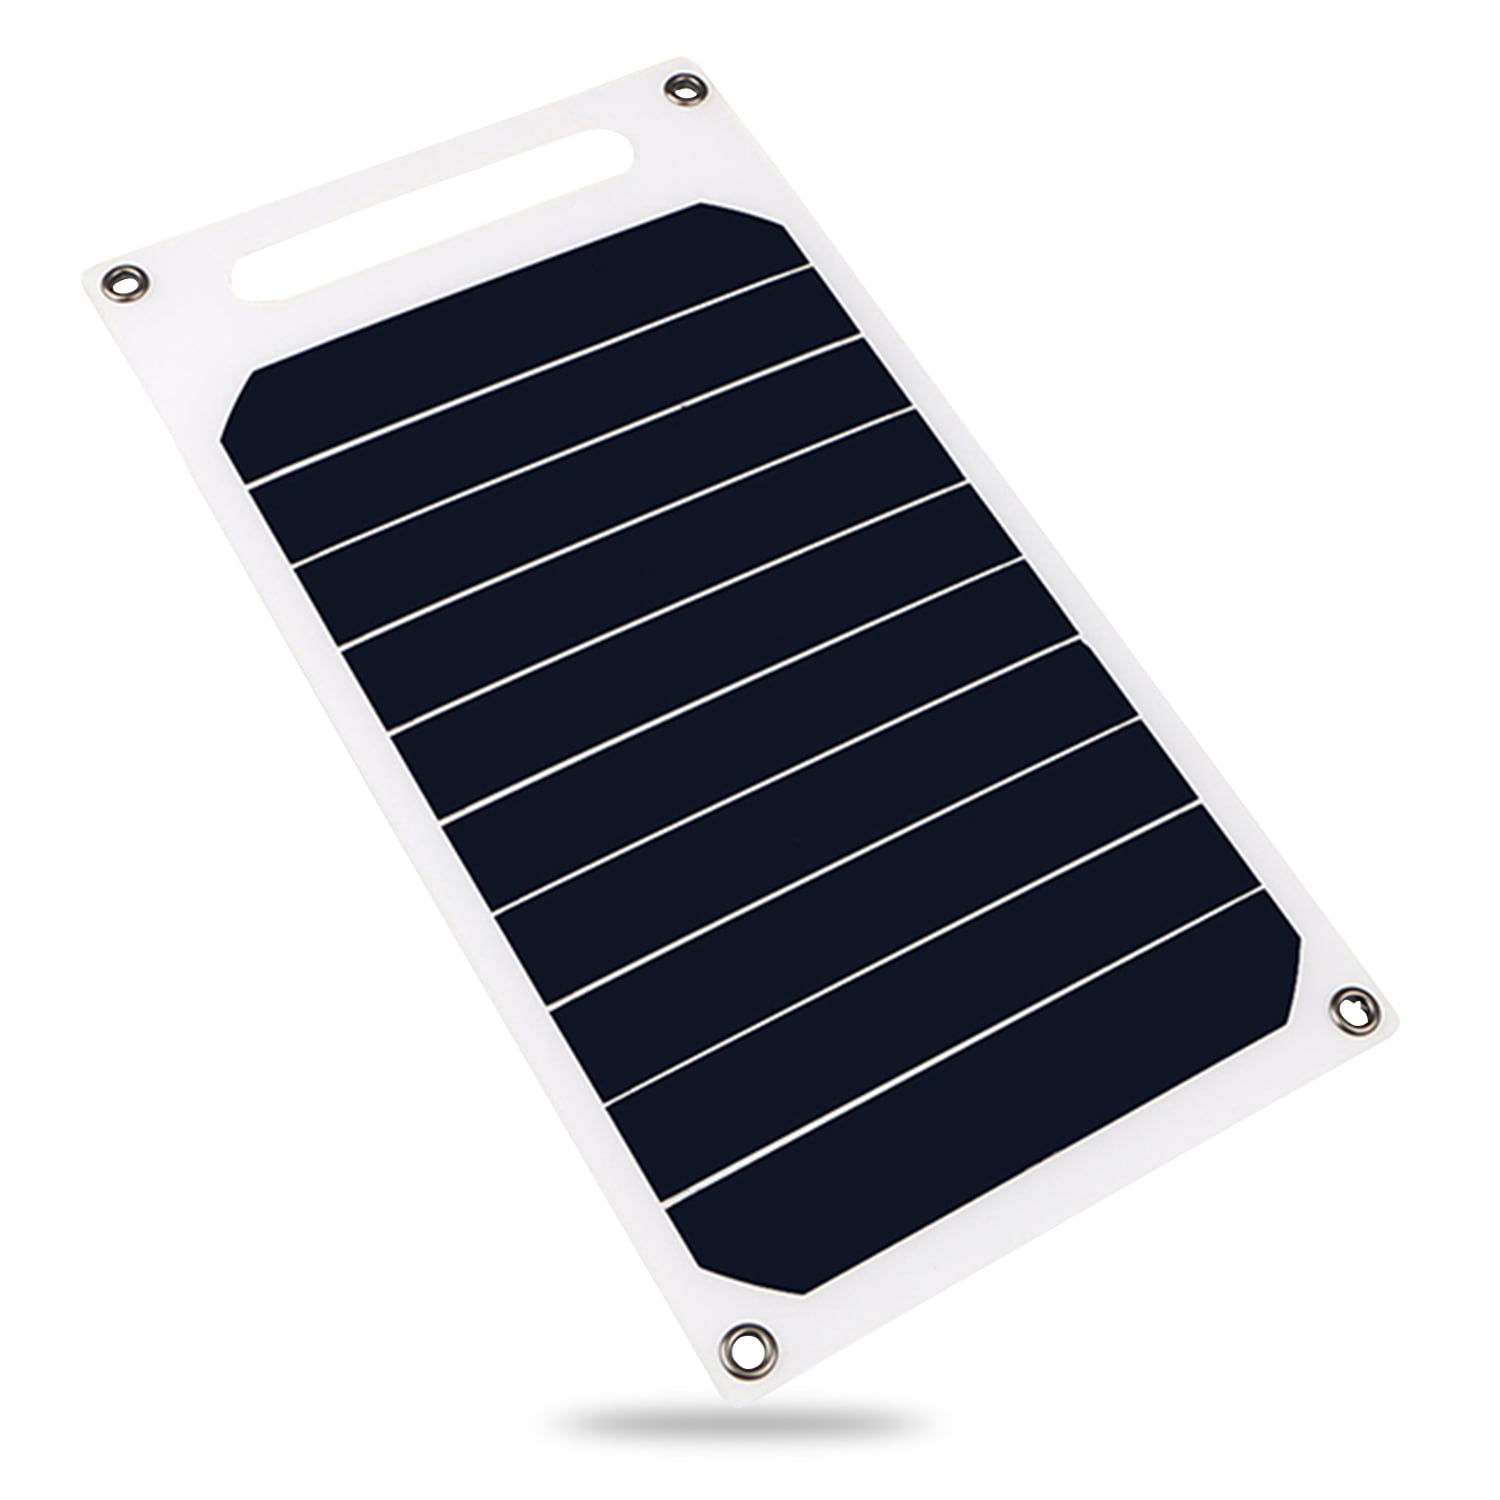 Mini Solar Panel,5V 6W USB Monocrystalline Solar Panel Charger,Waterproof Solar Charger with Built-in Voltage Stabilization System for Smart Phone,Power Bank and GPS Unit 